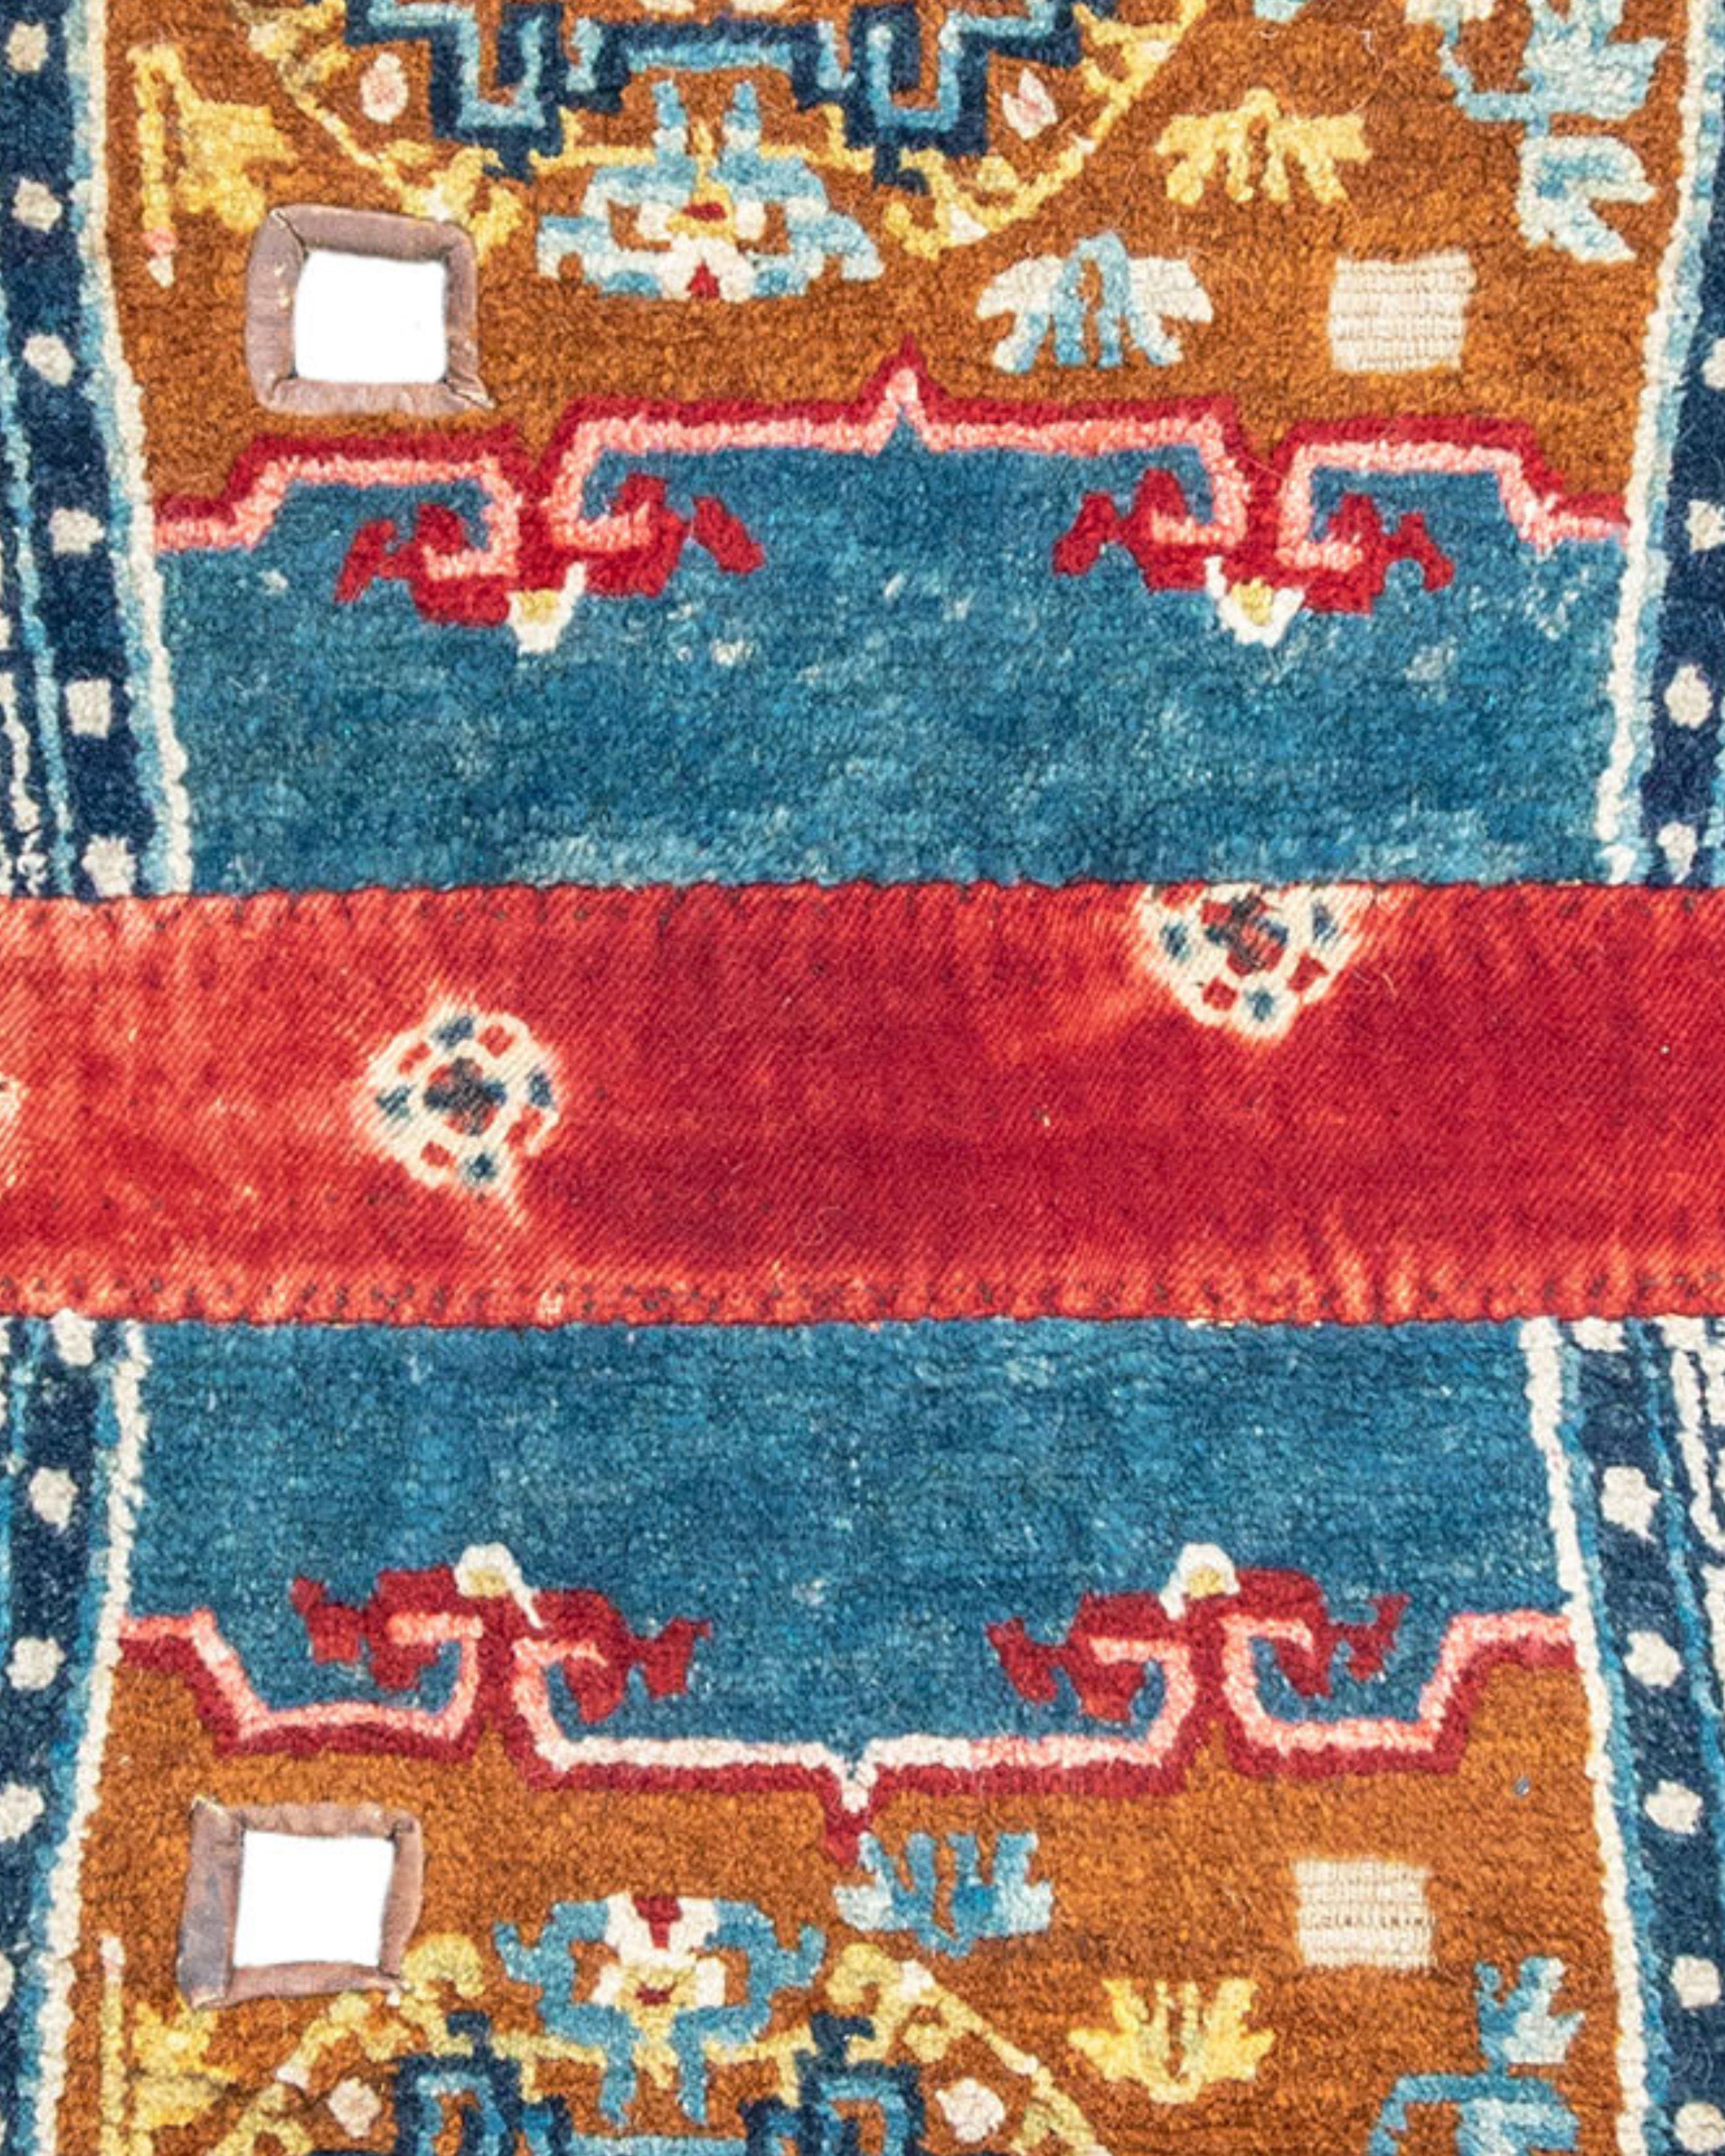 Tibetan Saddle Rug, Late 19th Century

As stated elsewhere and throughout the literature, saddle rugs are not uncommon and appear to be an essential component of the equestrian culture of the high plateau. This example uncharacteristically features